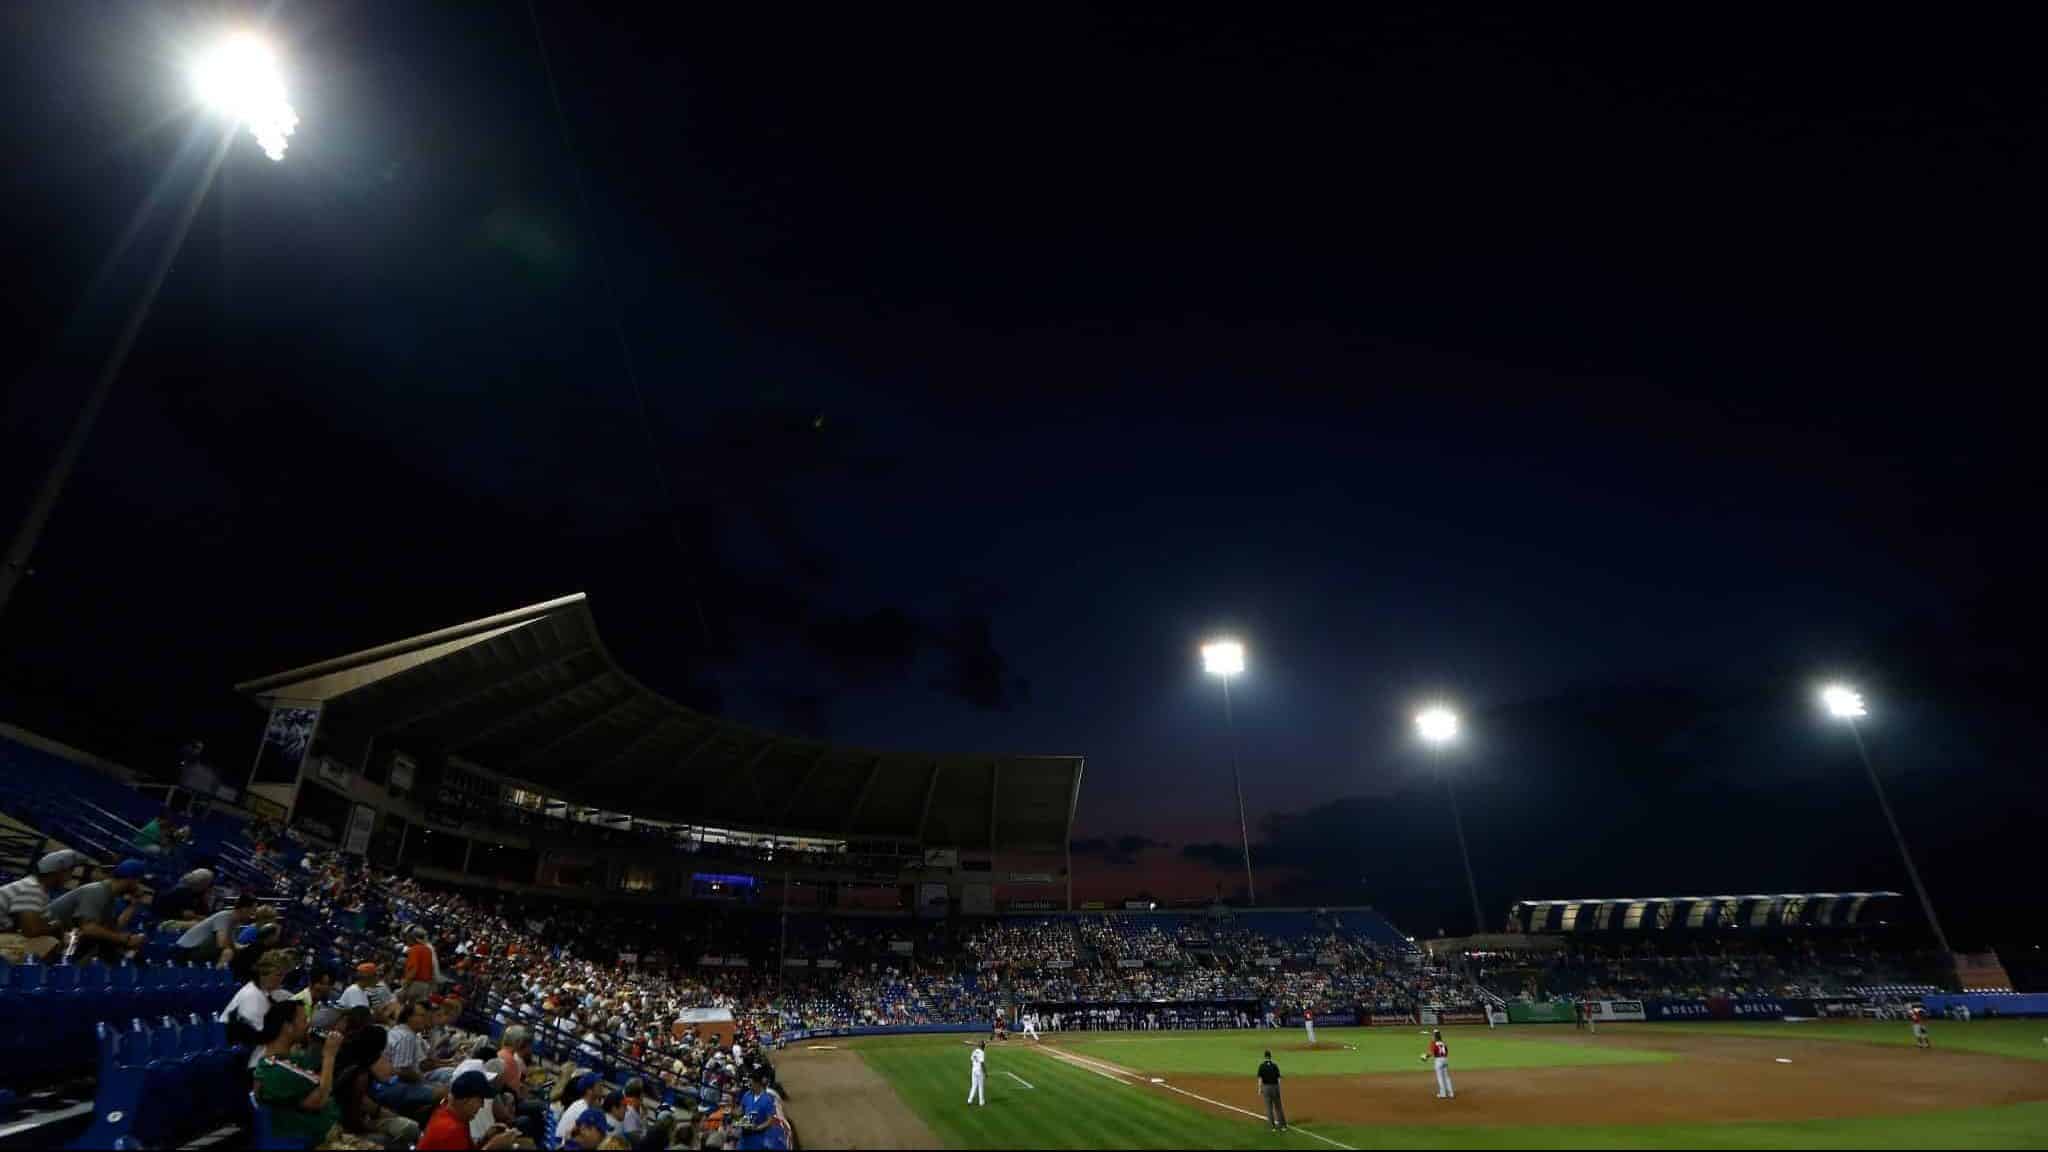 PORT ST. LUCIE, FL - FEBRUARY 25: The New York Mets play the Washington Nationals at Tradition Field on February 25, 2013 in Port St. Lucie, Florida.